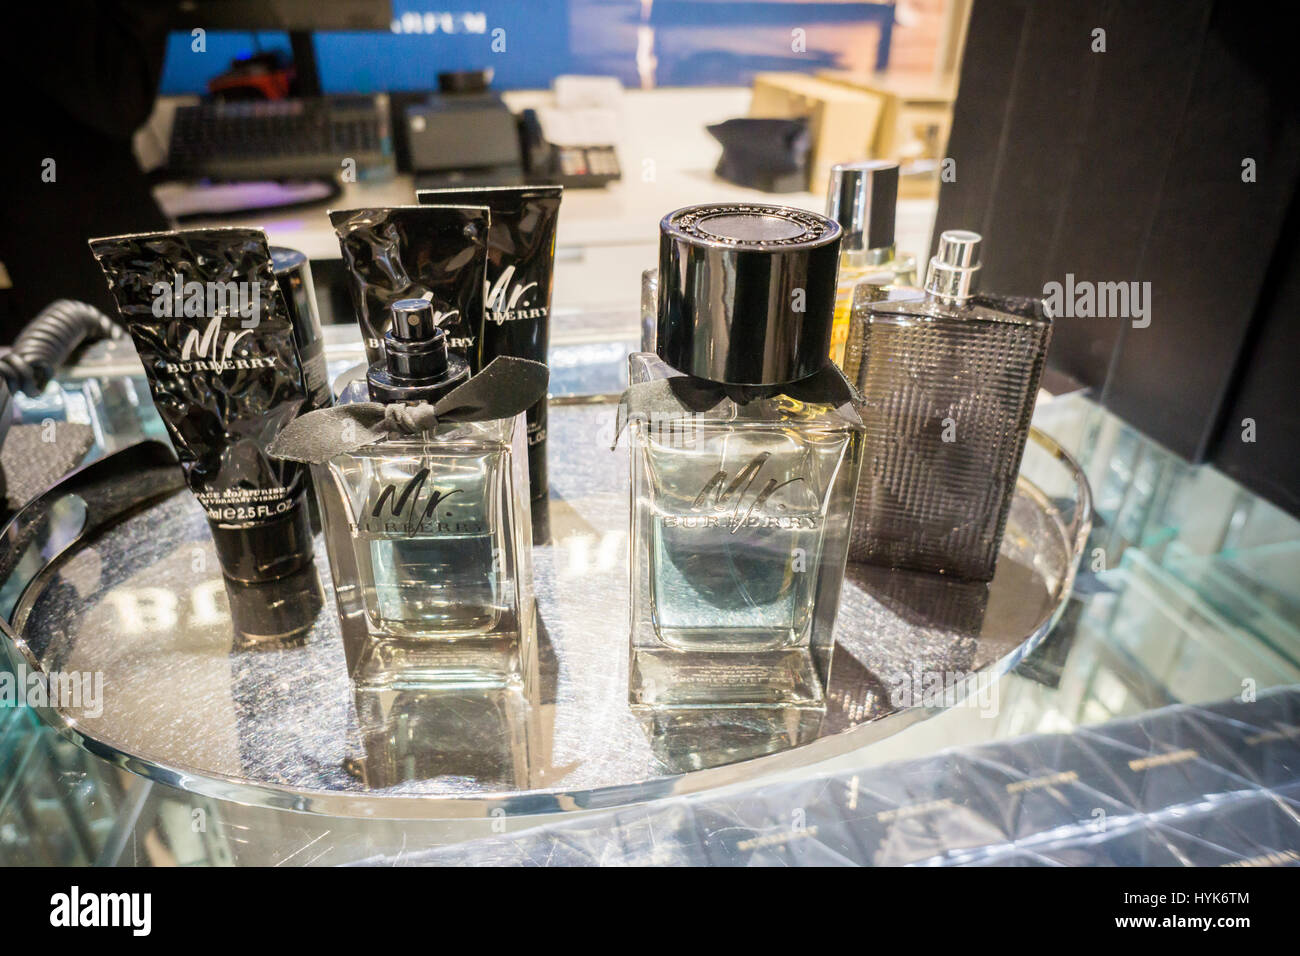 Testers of Burberry perfume are seen in Macy's Herald Square Stock Photo -  Alamy